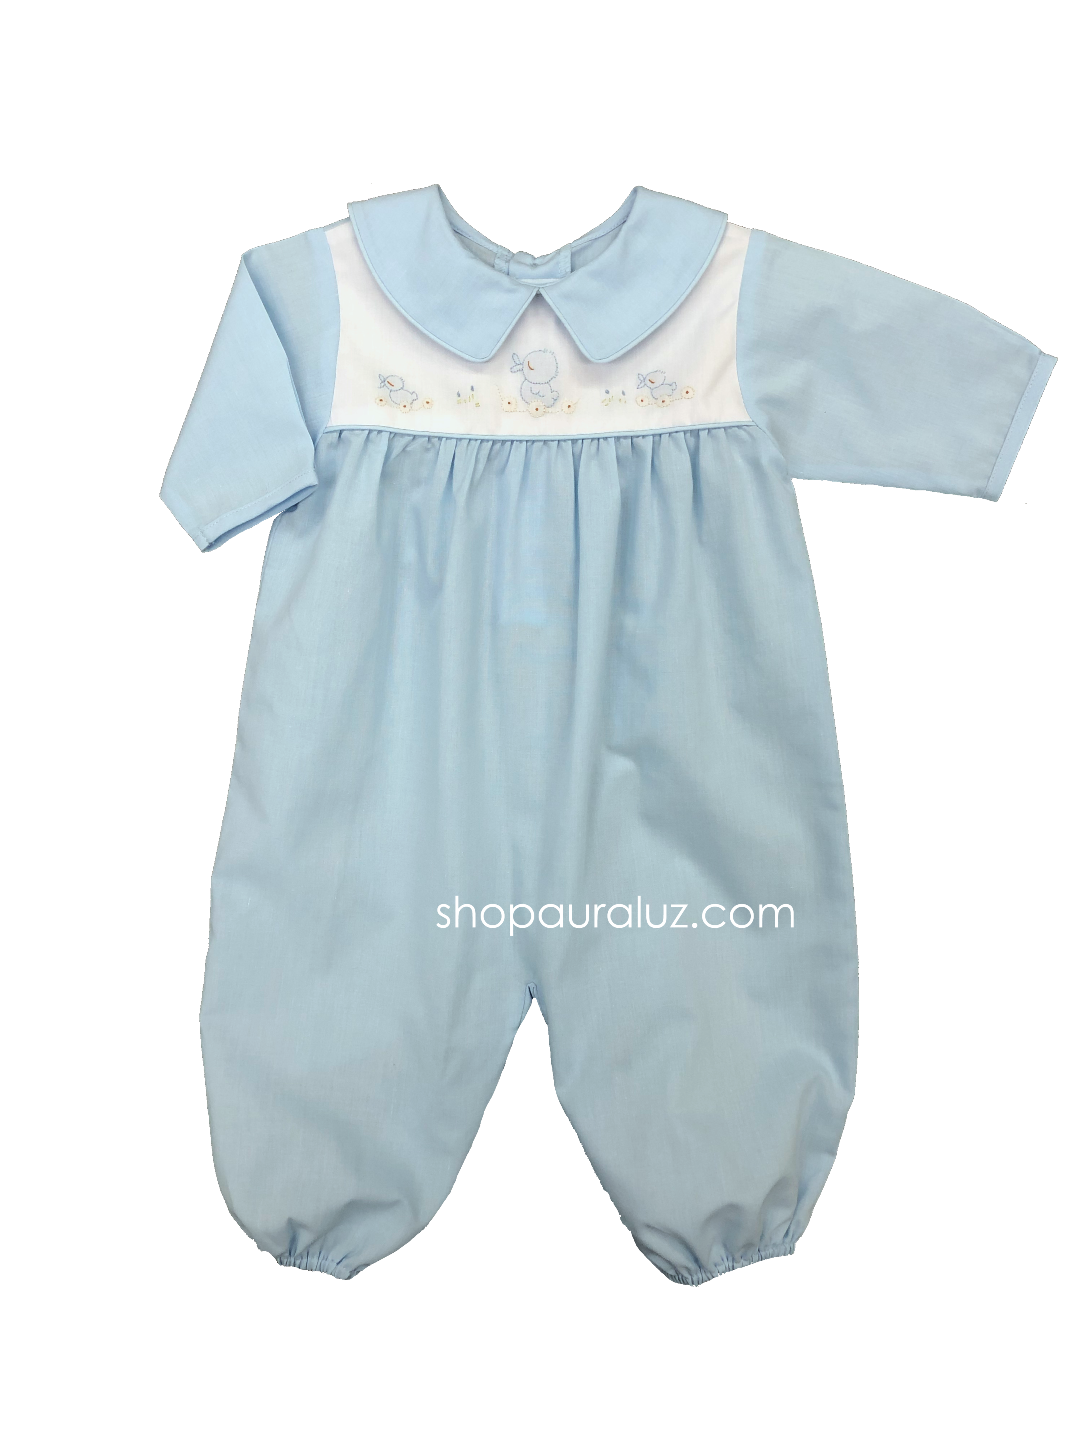 Auraluz Boy l/s Convertibag...Blue with binding trim and embroidered ducks